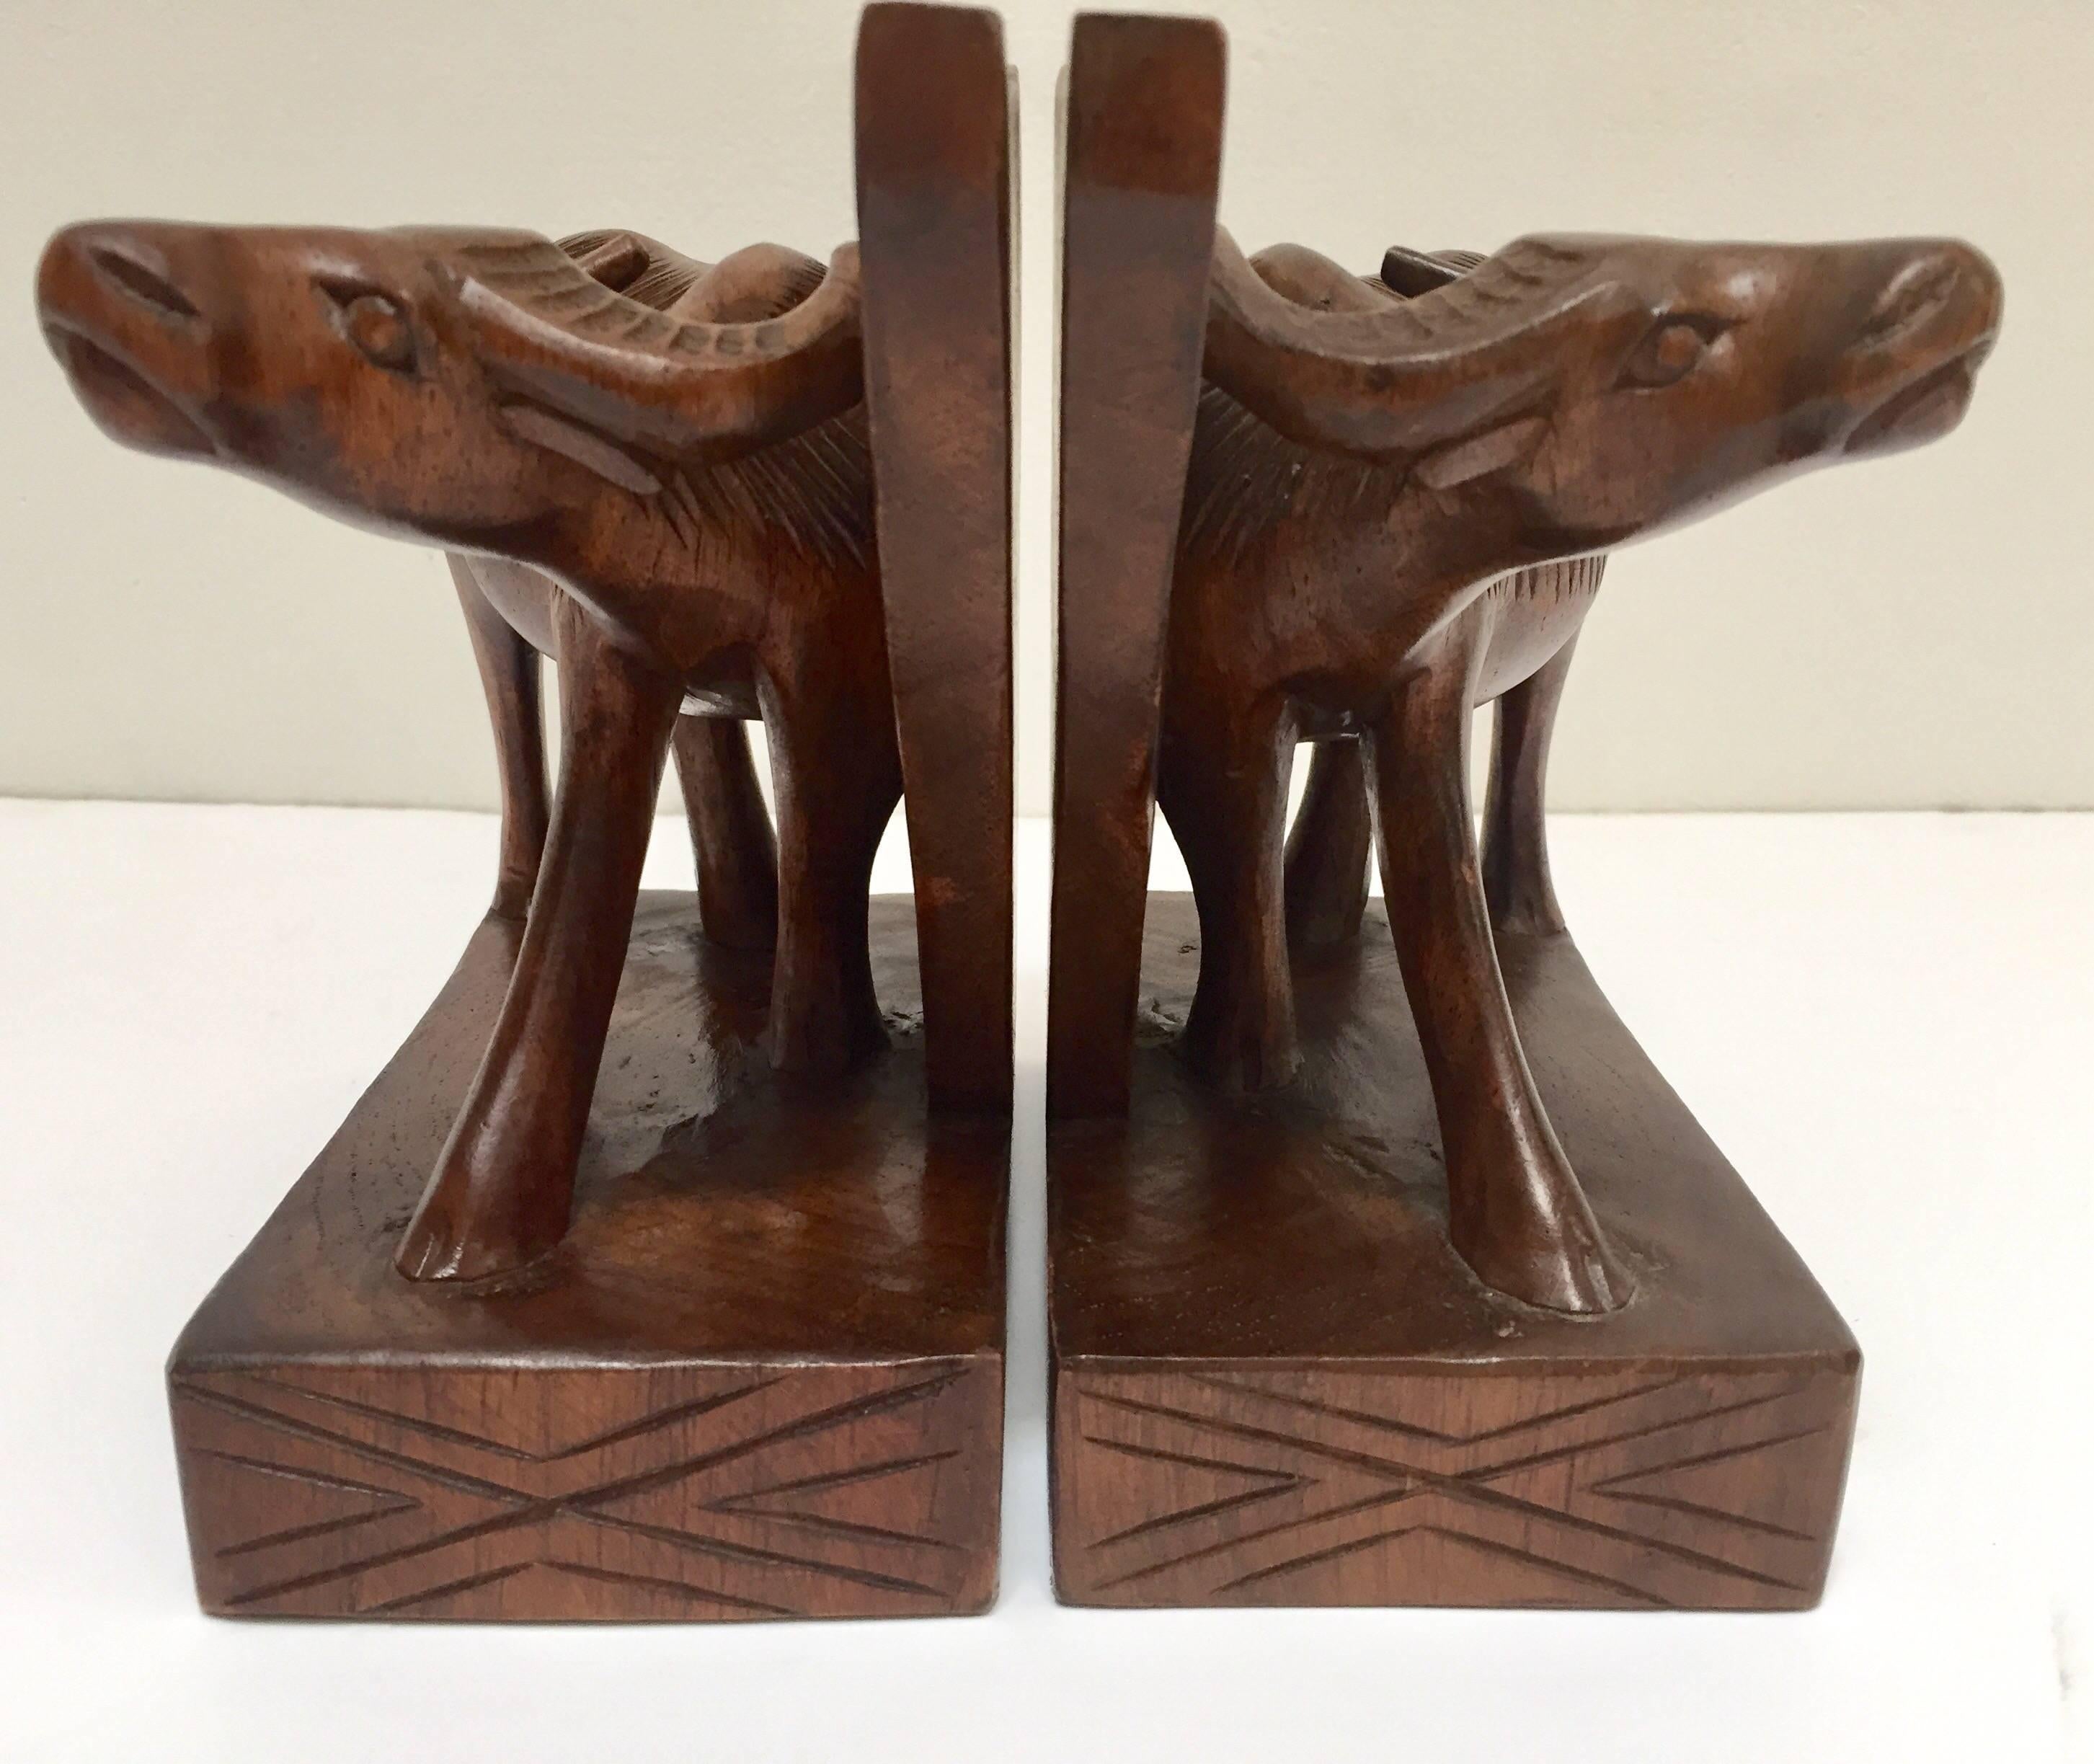 Hand-carved wooden tribal sculptures of African buffalo bookends.
These are hand-carved and therefore not completely identical,
Size for each piece is 7 in H x 6 in W x 3.5 in D.
Tribal African Art